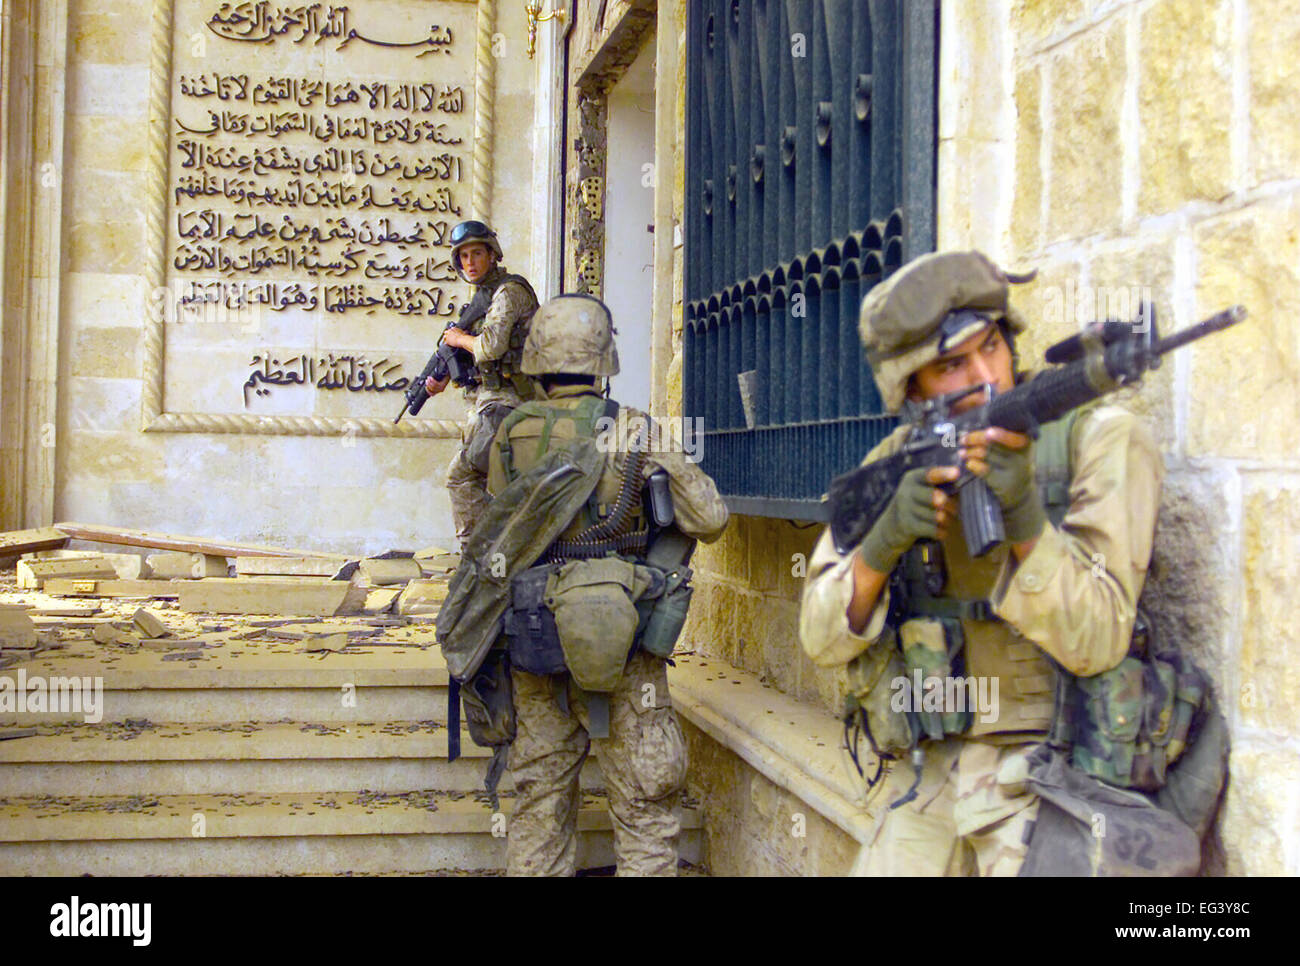 US MARINE CORPS Marines from the 1st Battalion, 7th Marines (1/7), Charlie Company, Twentynine Palms, California (CA), cover each other with 5.56 mm M16A2 assault rifles as they prepare to enter one of Saddam Hussein’s palaces in Baghdad as they takeover the complex during Operation IRAQI FREEDOM in April 2003. Stock Photo